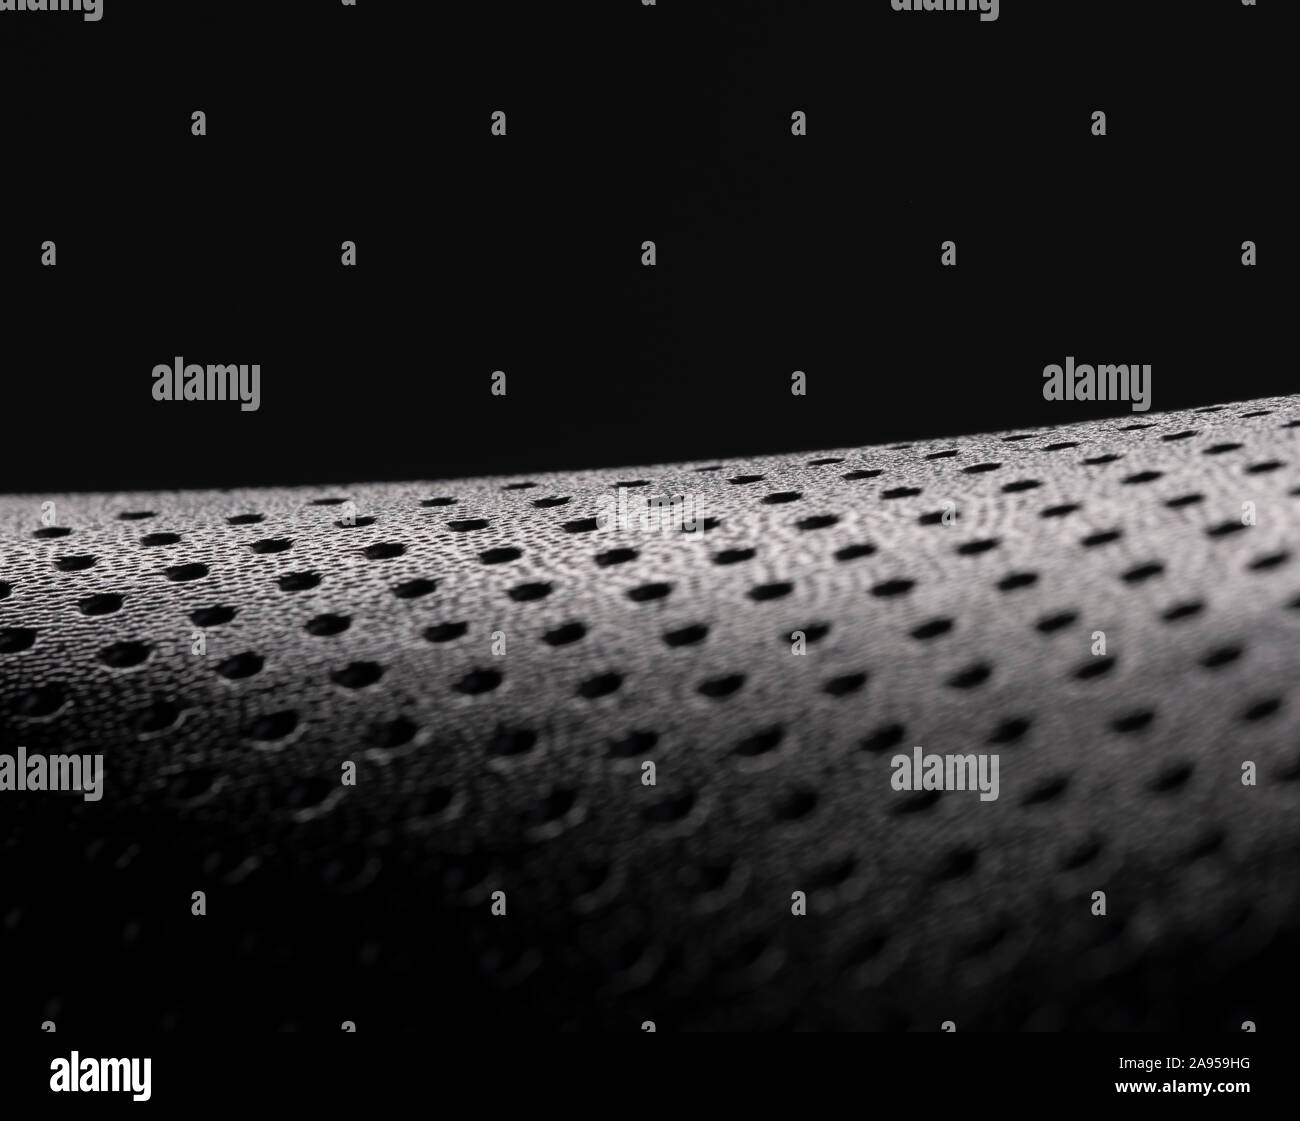 Macro image of the texture of a black bicycle seat against a black background Stock Photo